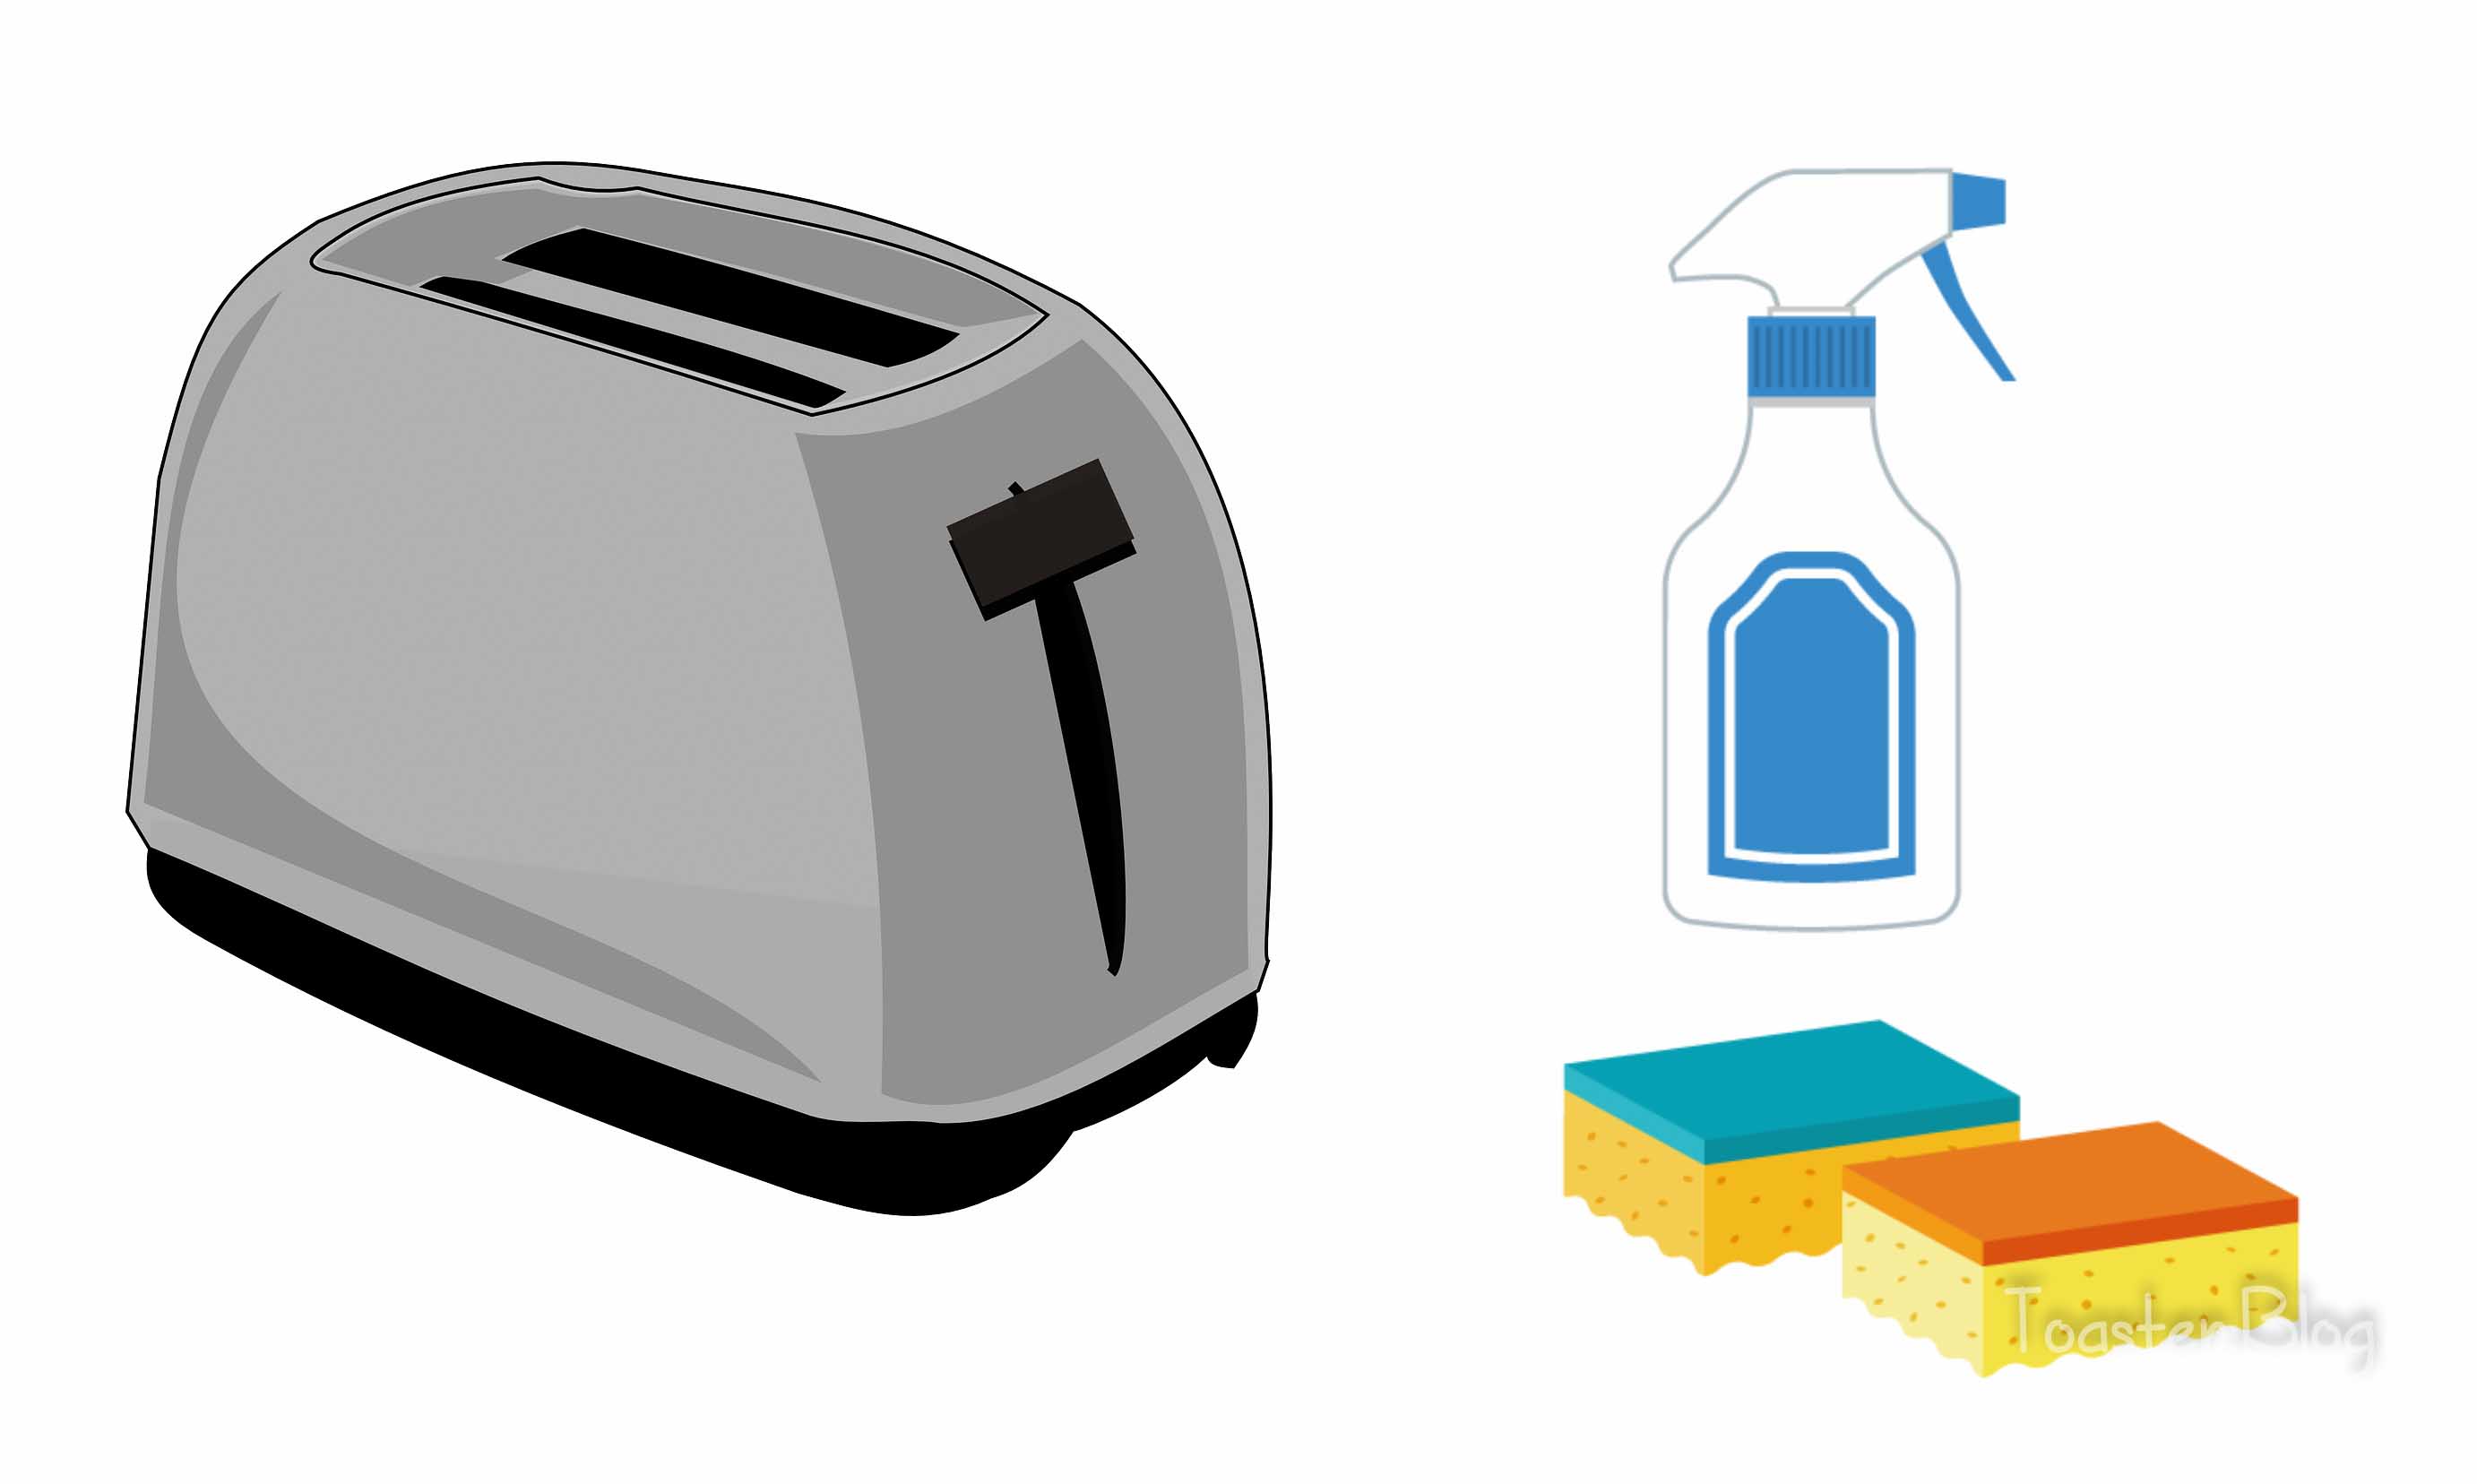 How to clean a toaster